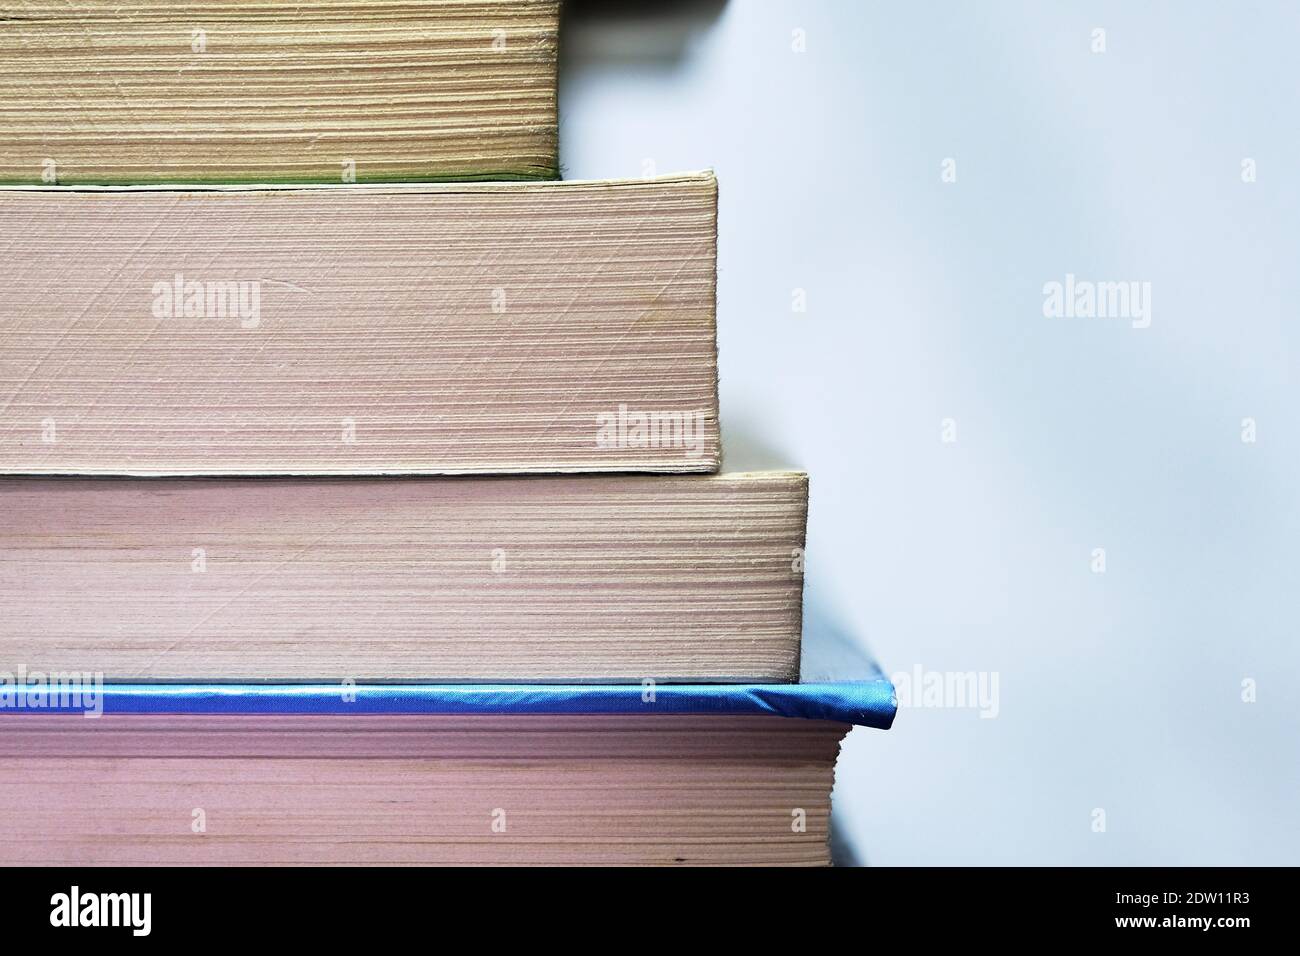 Books and reading love. bundle of books closed up photo. Stock Photo